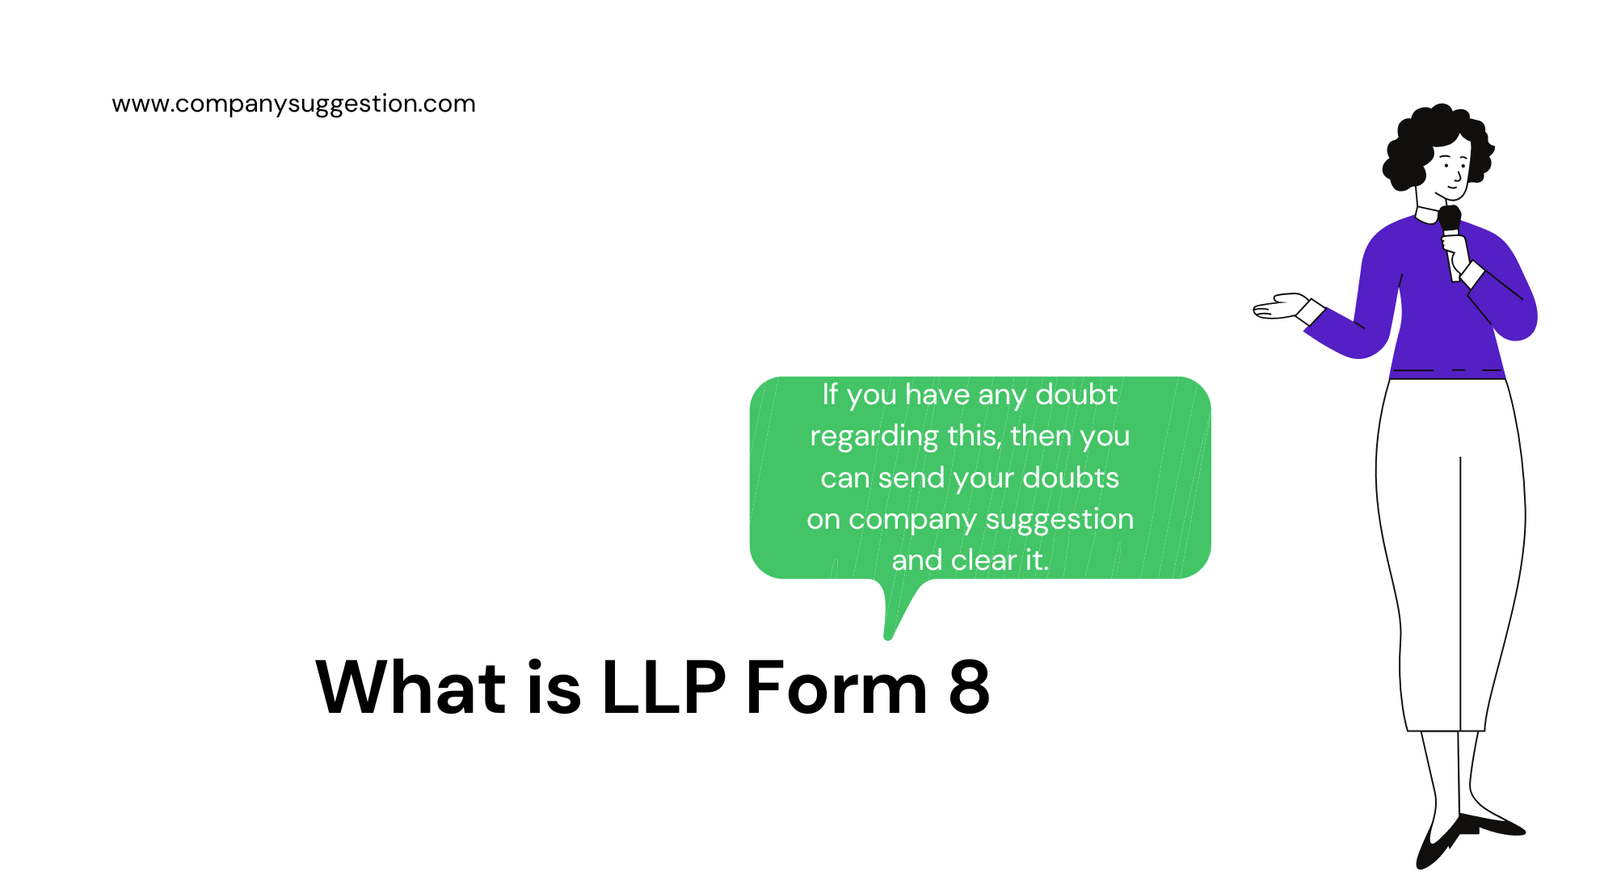 LLP Form 8 or Statement of Account & Solvency is a filing that must be filed every year by all Limited Liability Partnerships (LLPs) registered in India